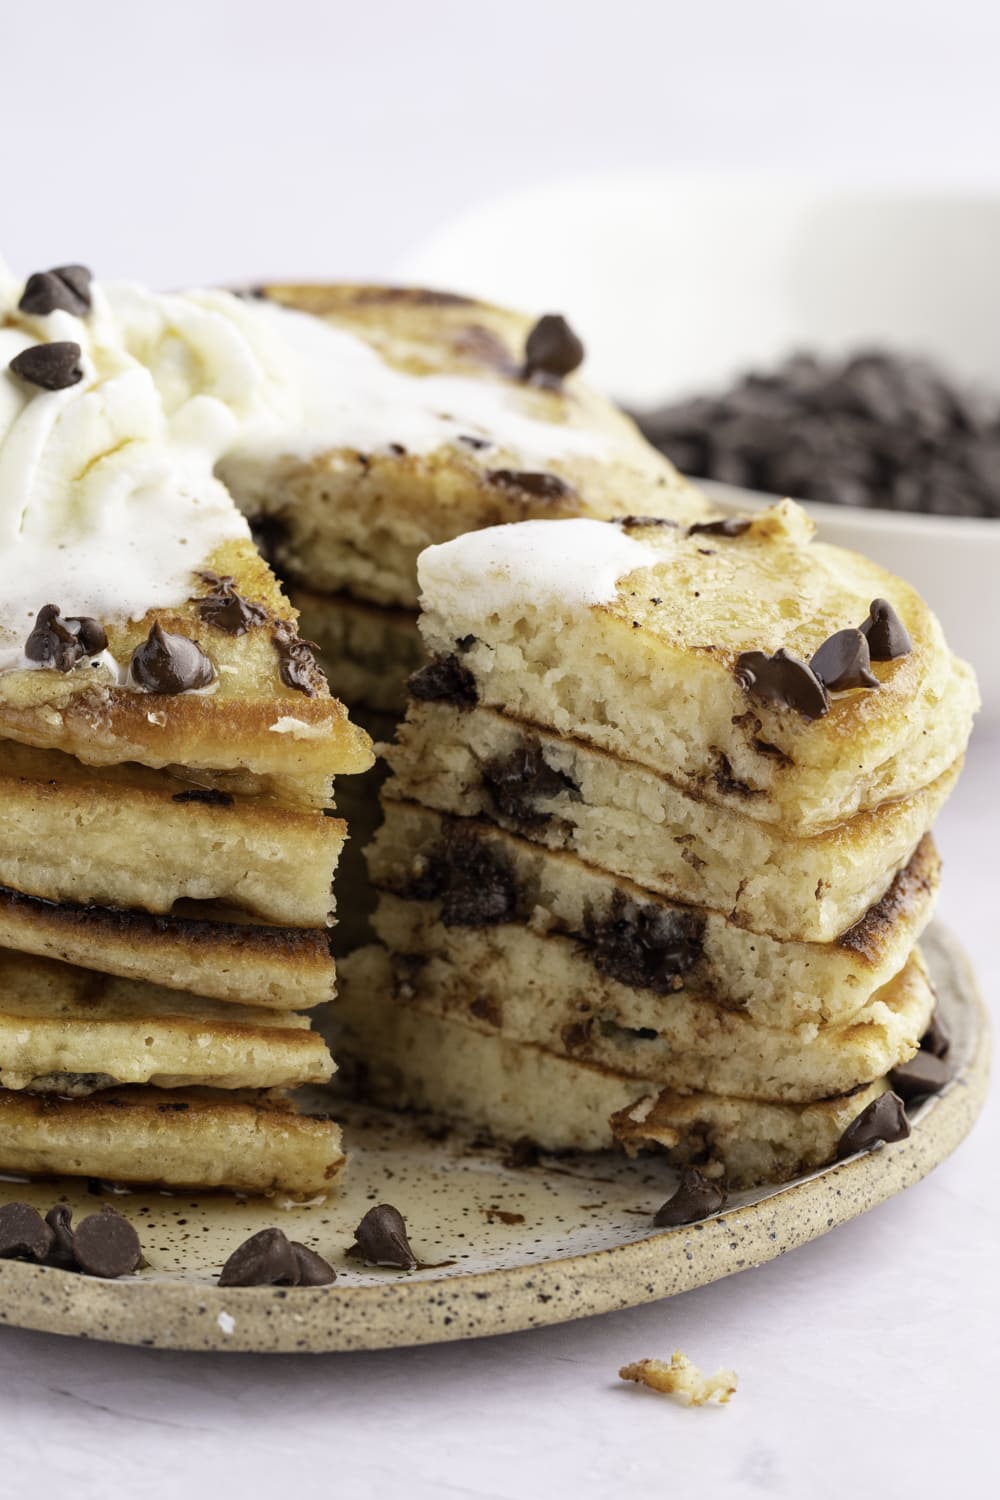 Sliced chocolate chip pancakes with whipped cream on top.   